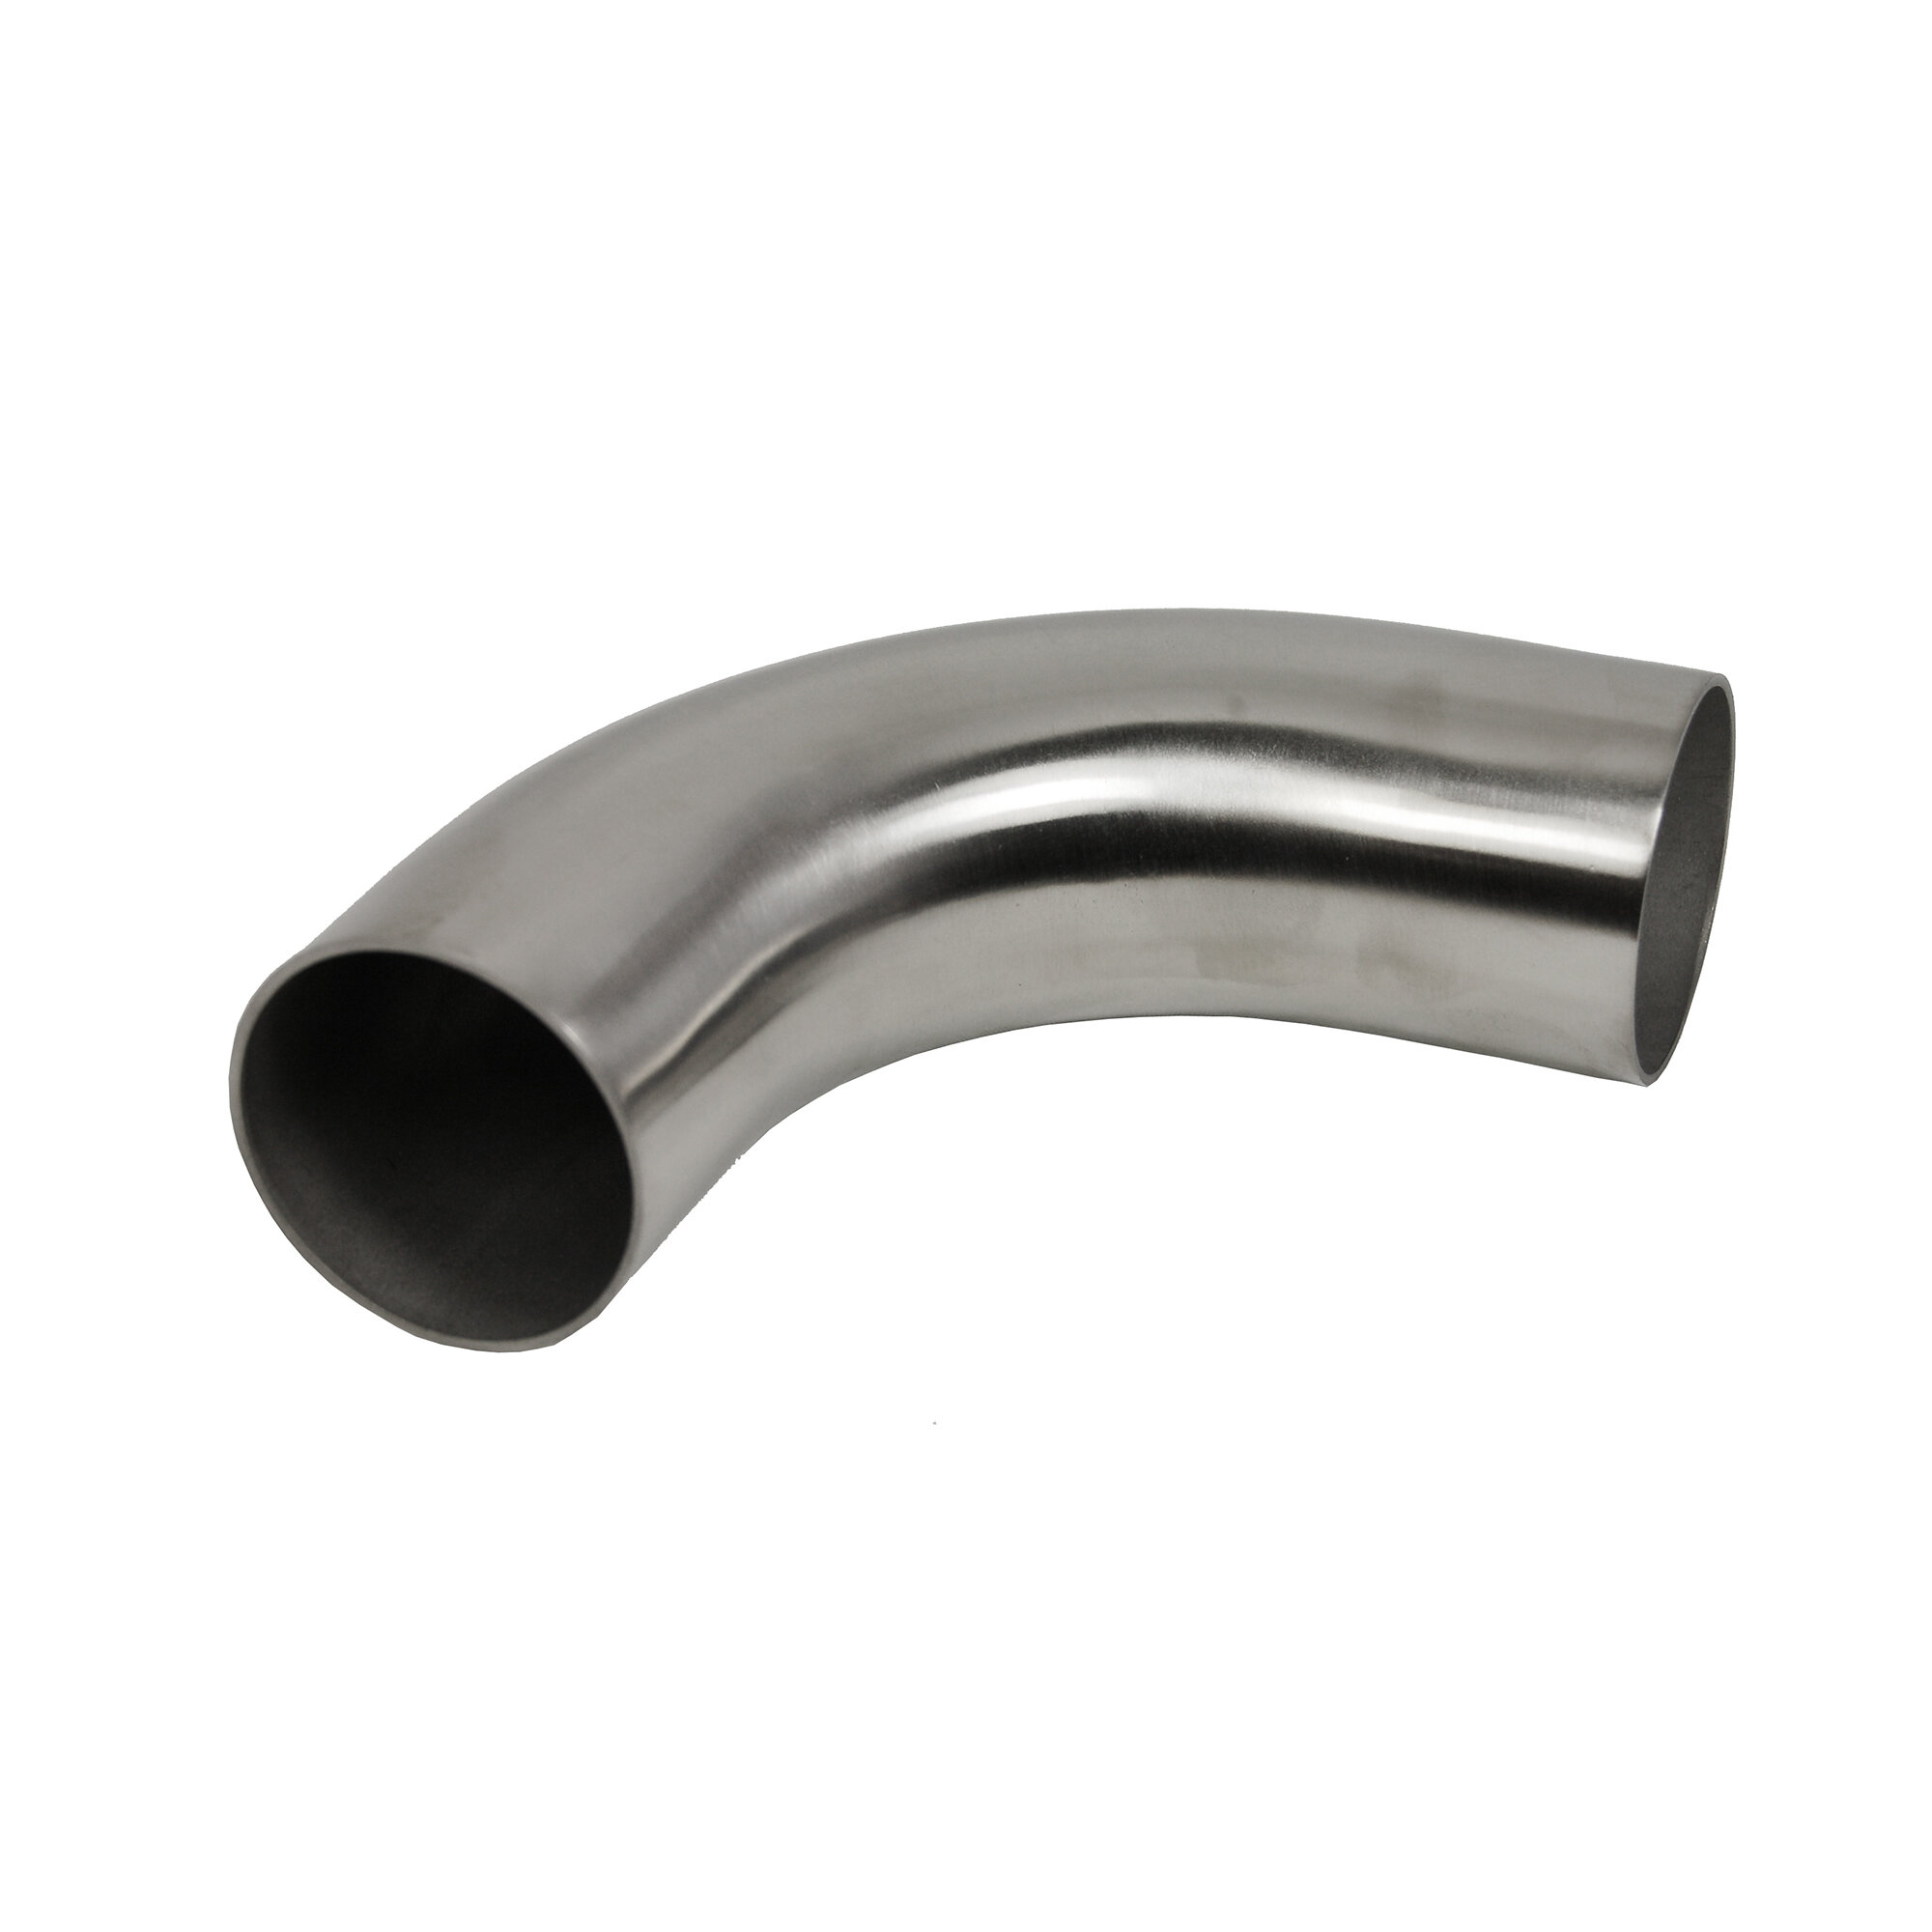 Hygienic Stainless Steel 90 Degree ISO Bend 1" 4" 